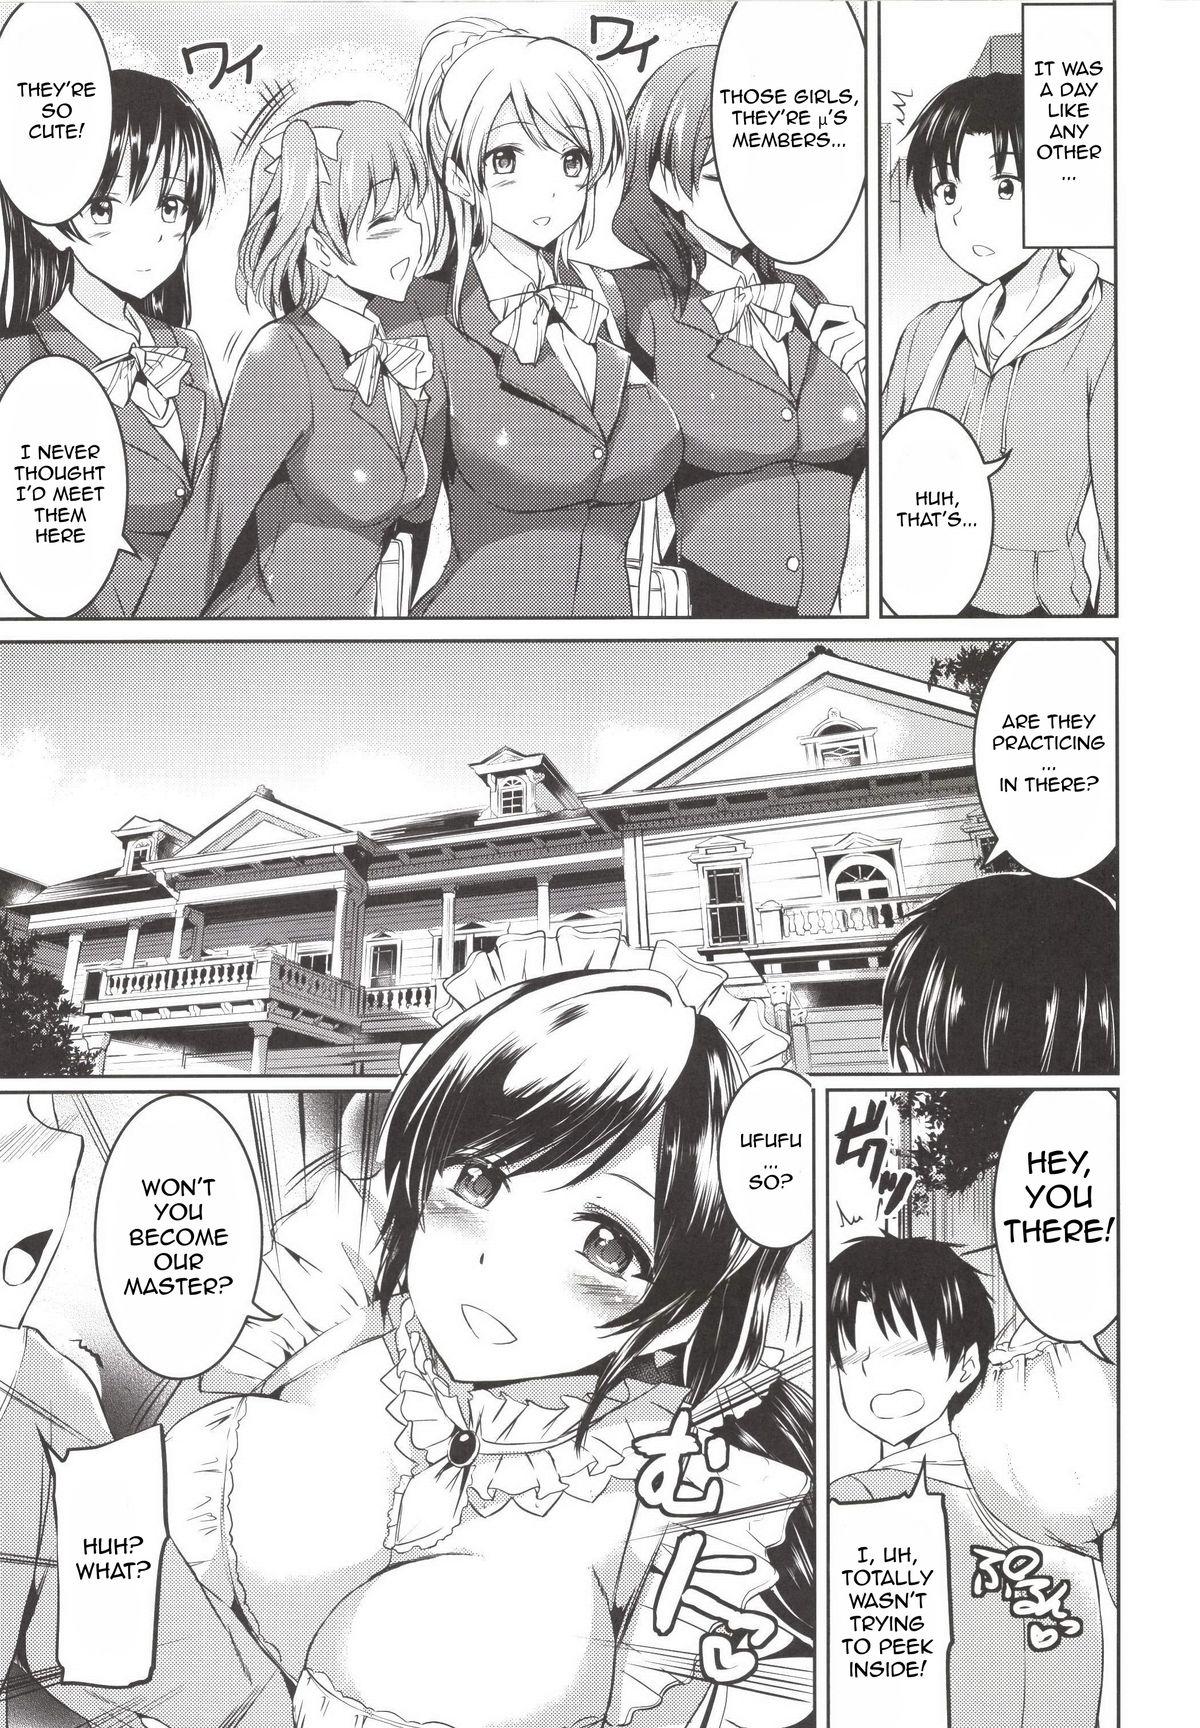 Ethnic Maid Live! - Love live Ano - Page 2